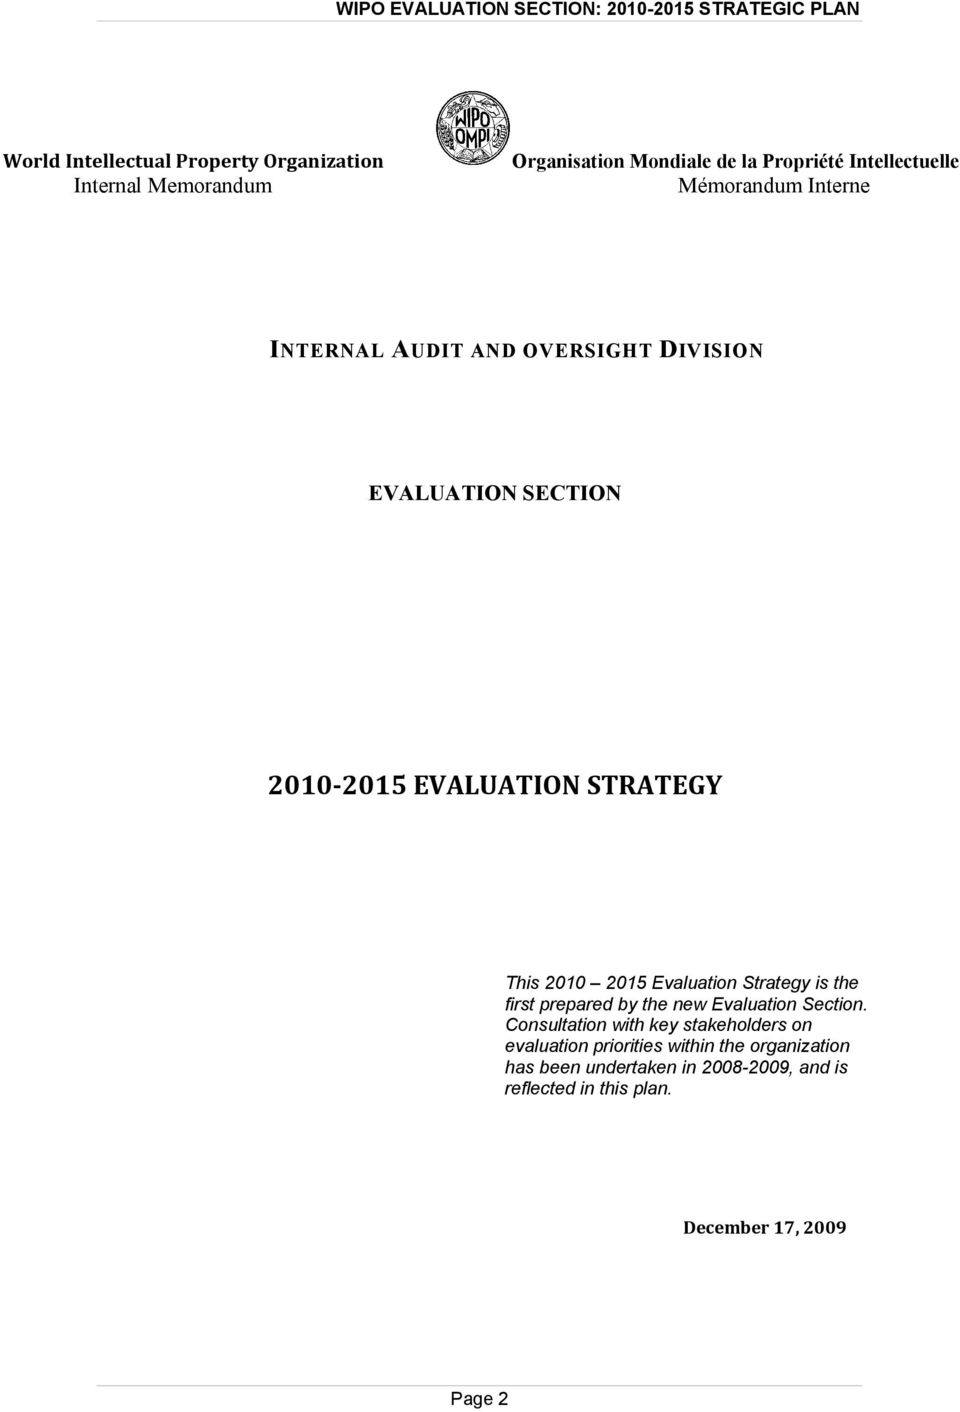 STRATEGY This 2010 2015 Evaluation Strategy is the first prepared by the new Evaluation Section.